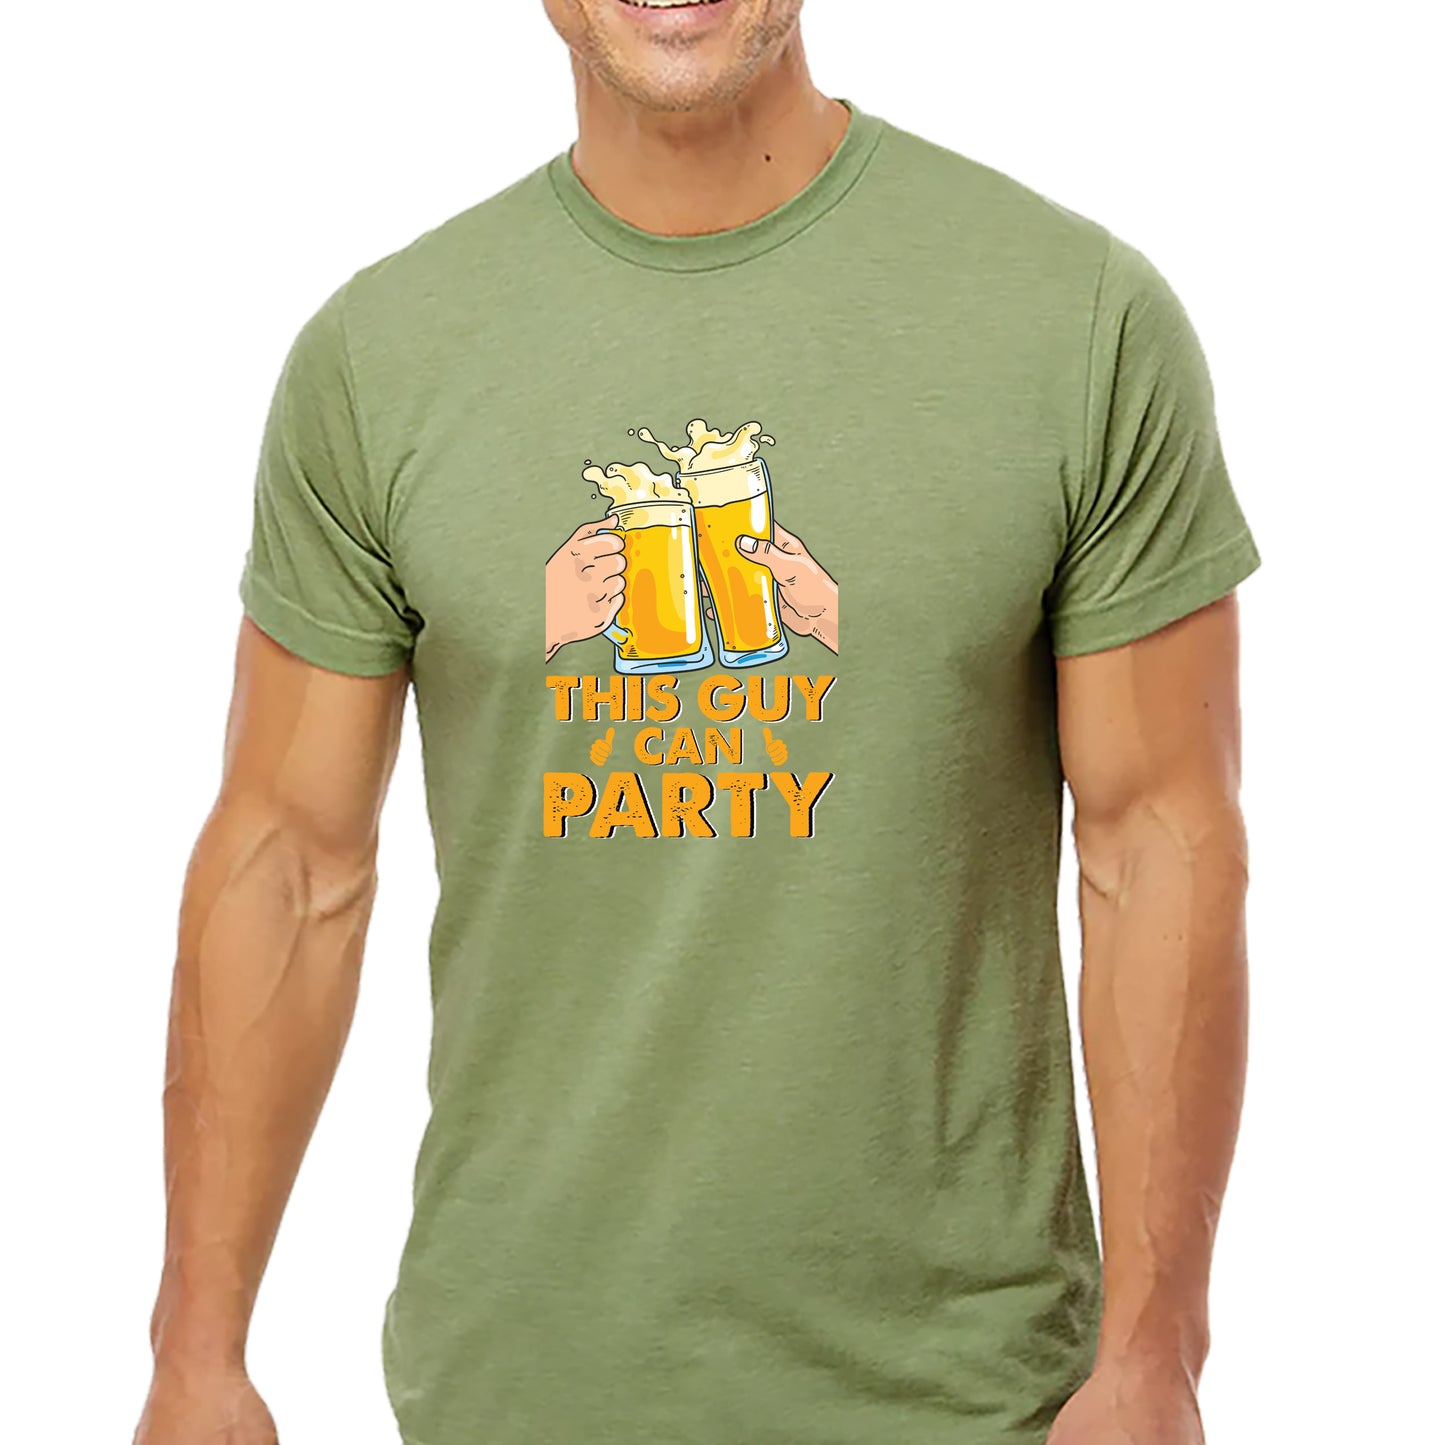 This Guy Can Party T-shirt